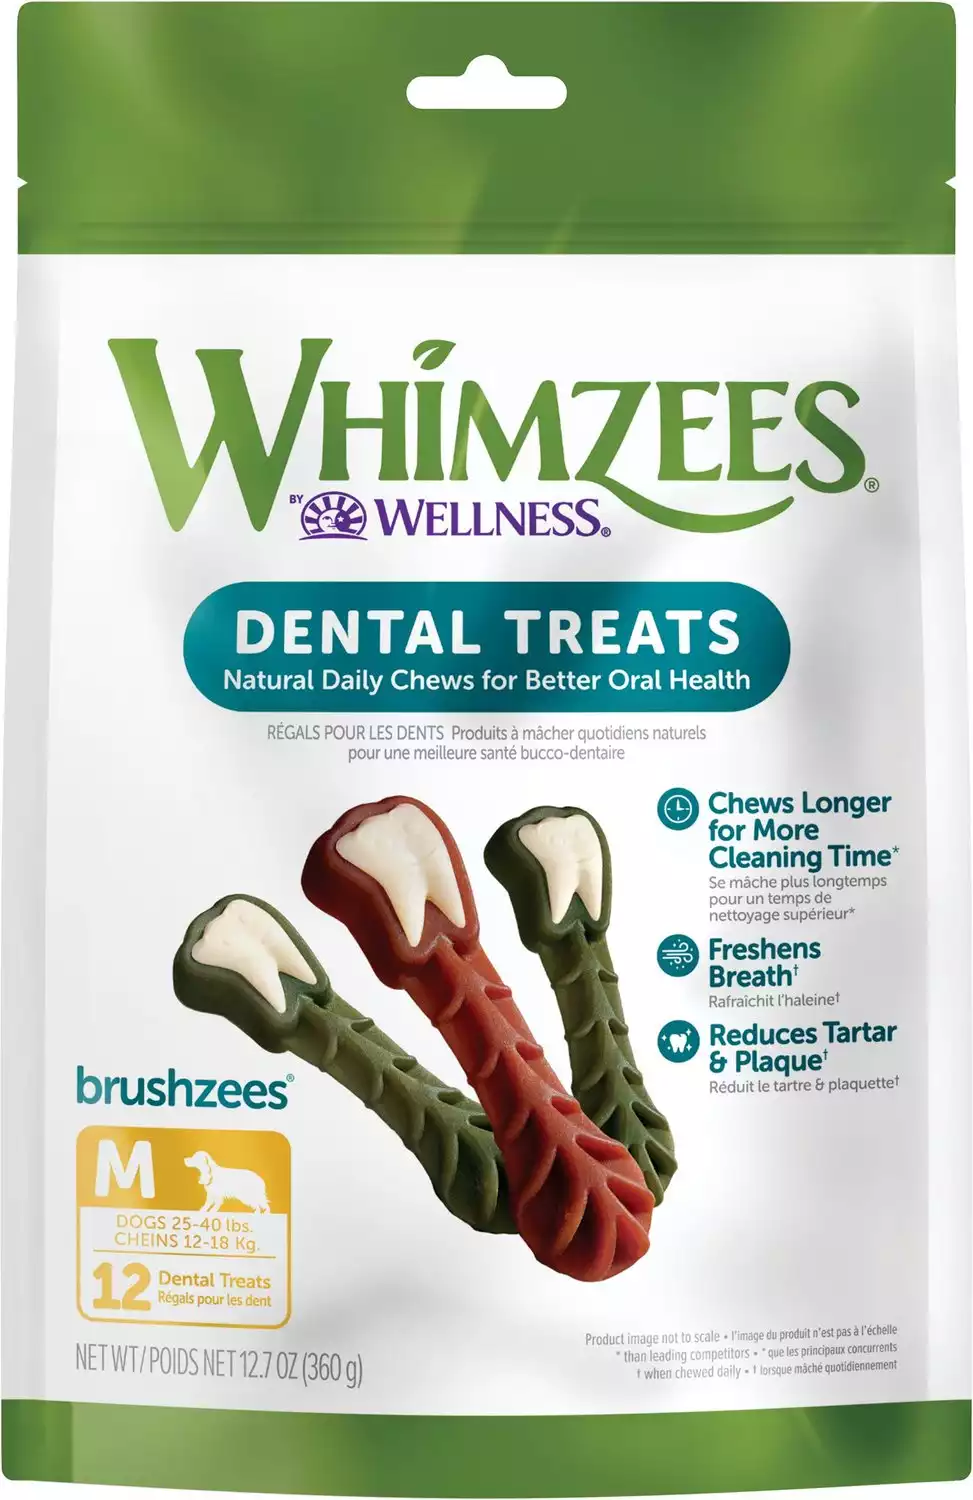 WHIMZEES by Wellness Brushzees Dental Chews Treats